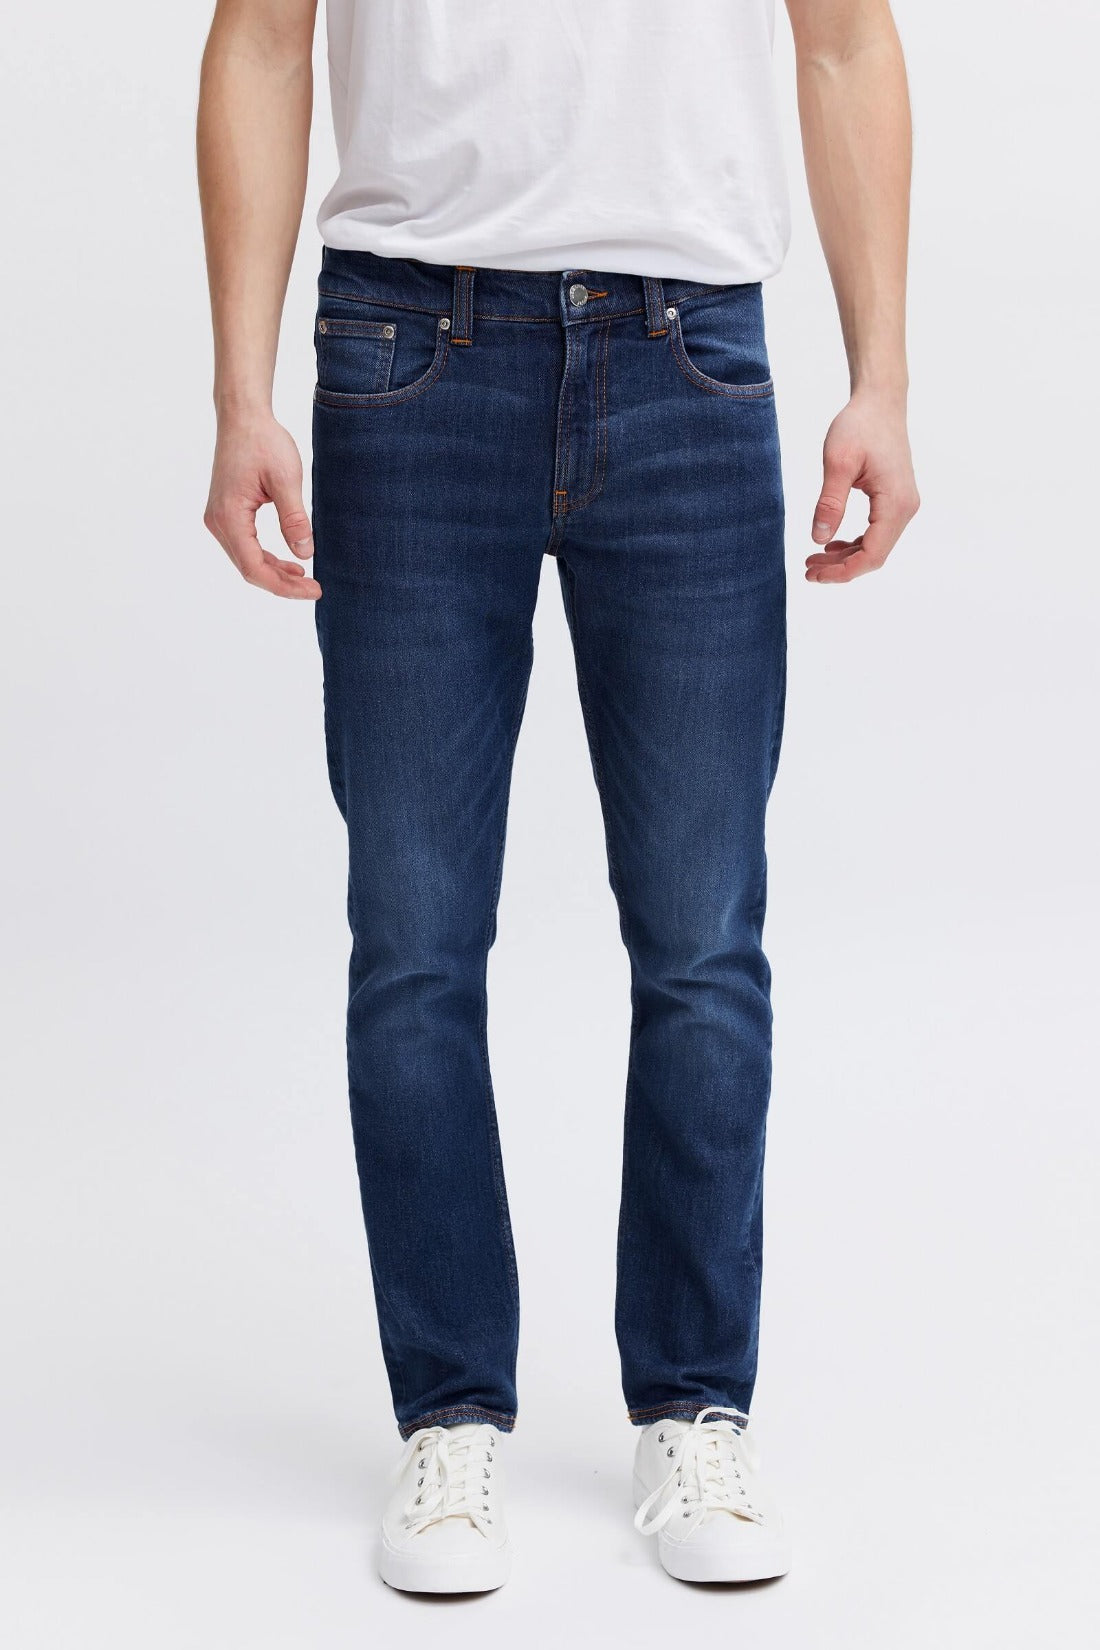 blue male jeans, comfortable style, organsk